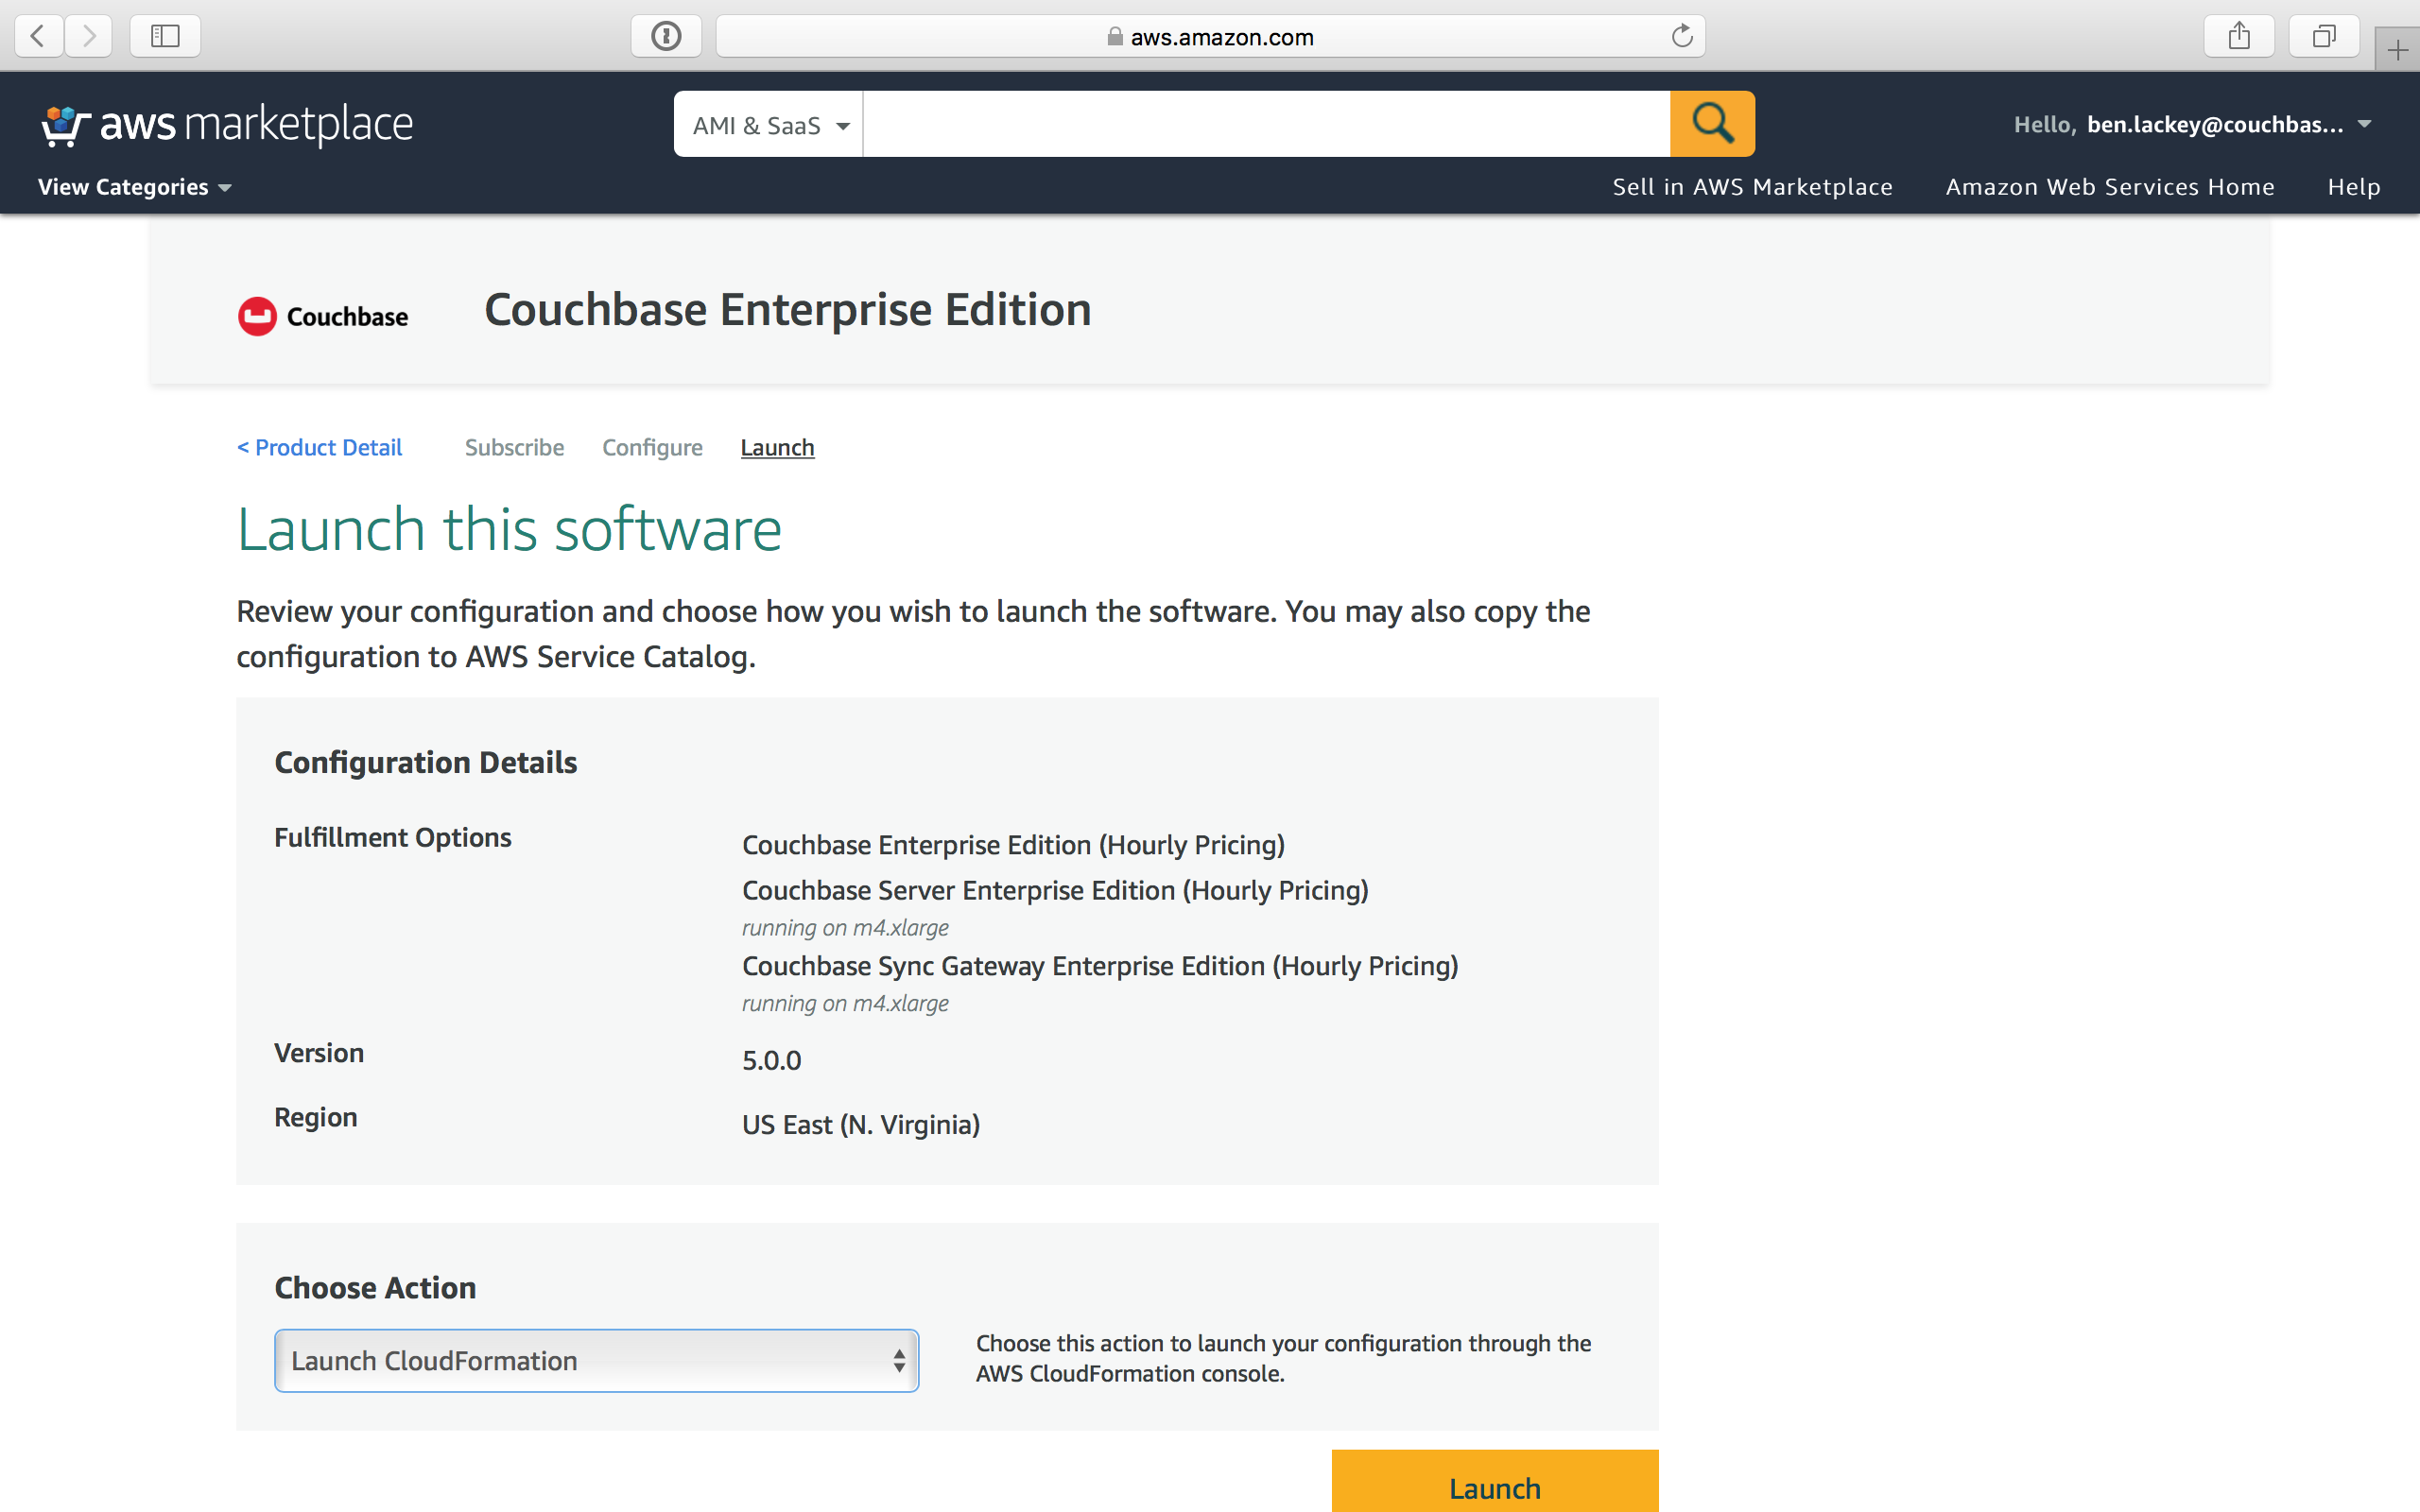 aws marketplace couchbase ee launch action